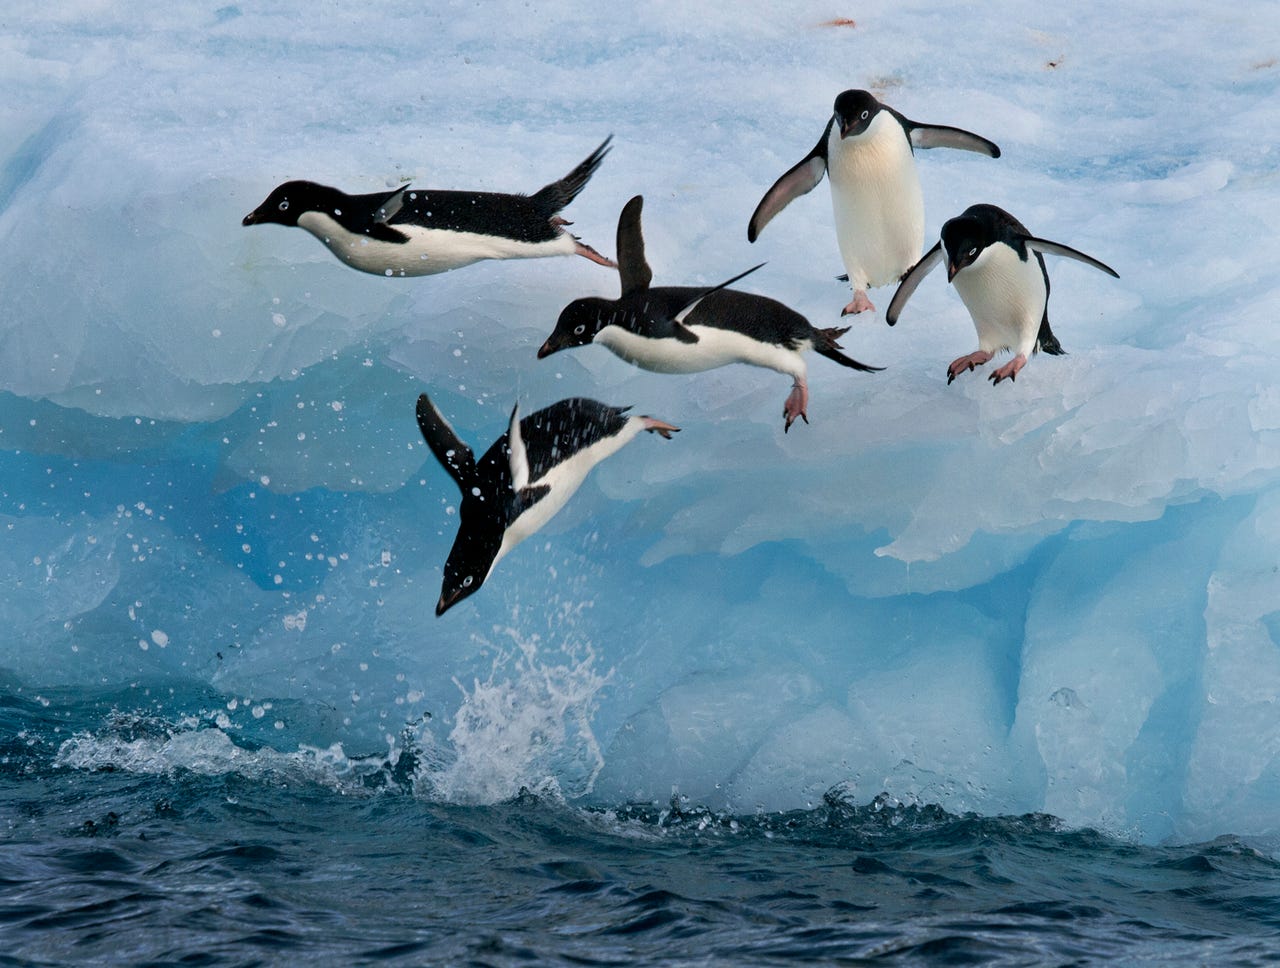 Near the northern tip of the Antarctic peninsula, a group of Adelie penguins launch themselves from an iceberg into the frigid waters of the ocean.